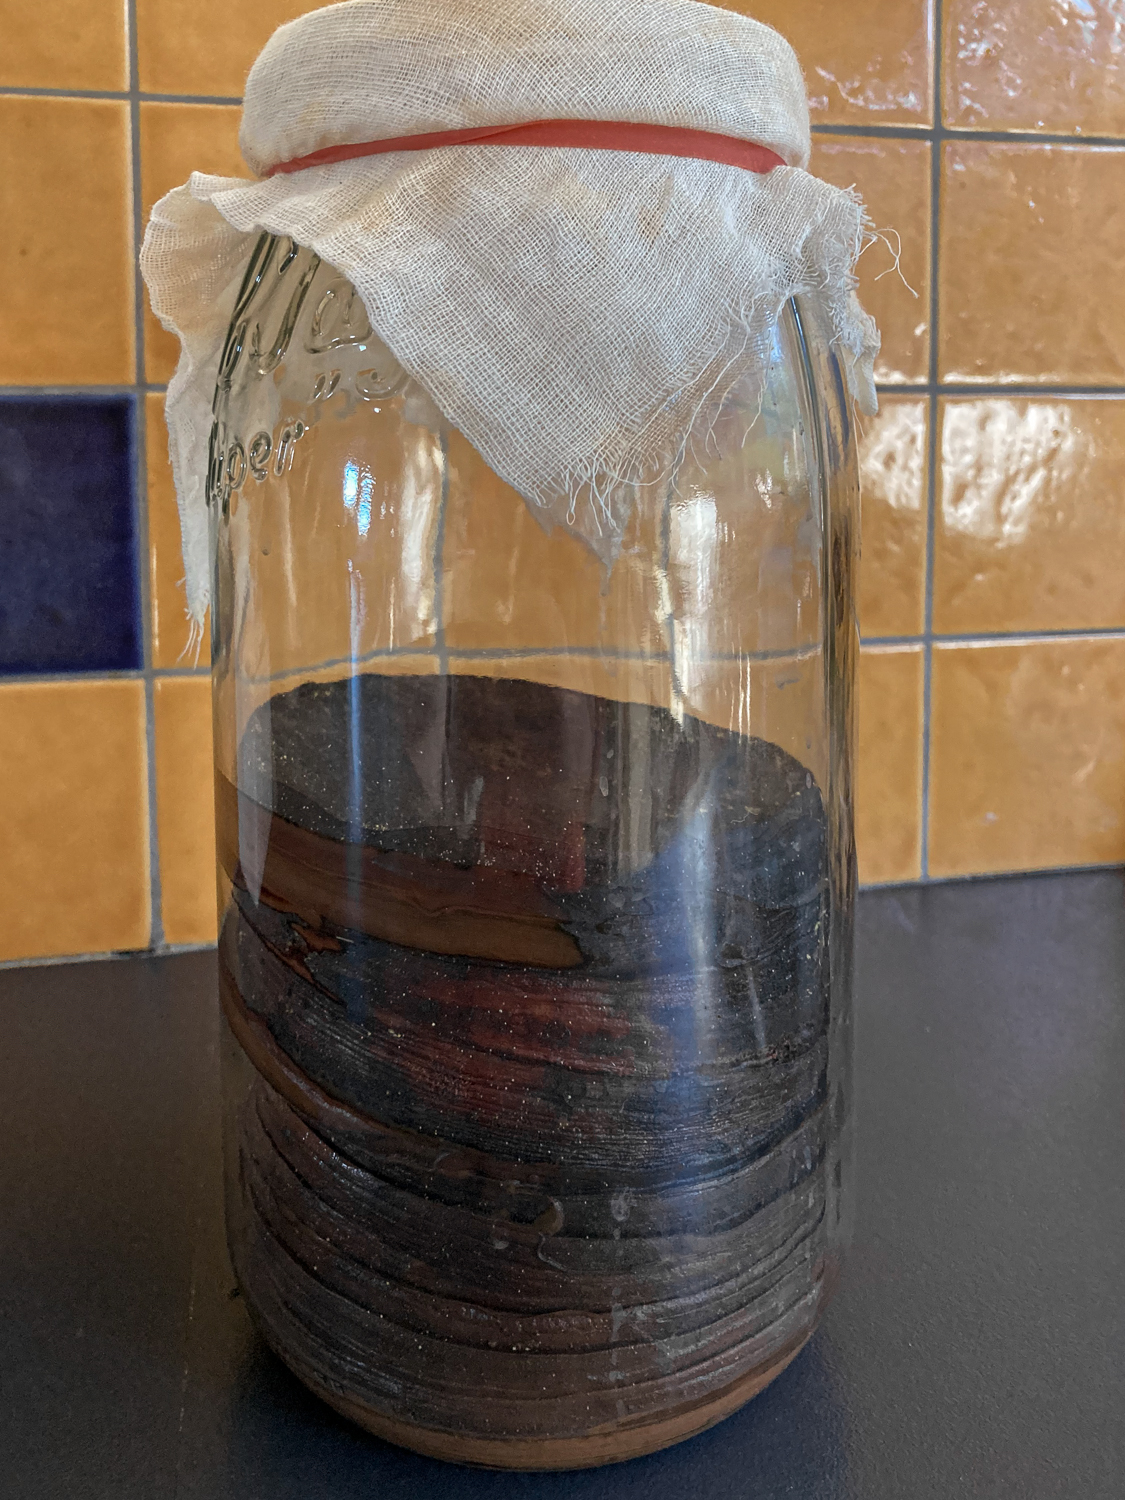 A large jar half filled with black circular disks and covered with a muslin cloth